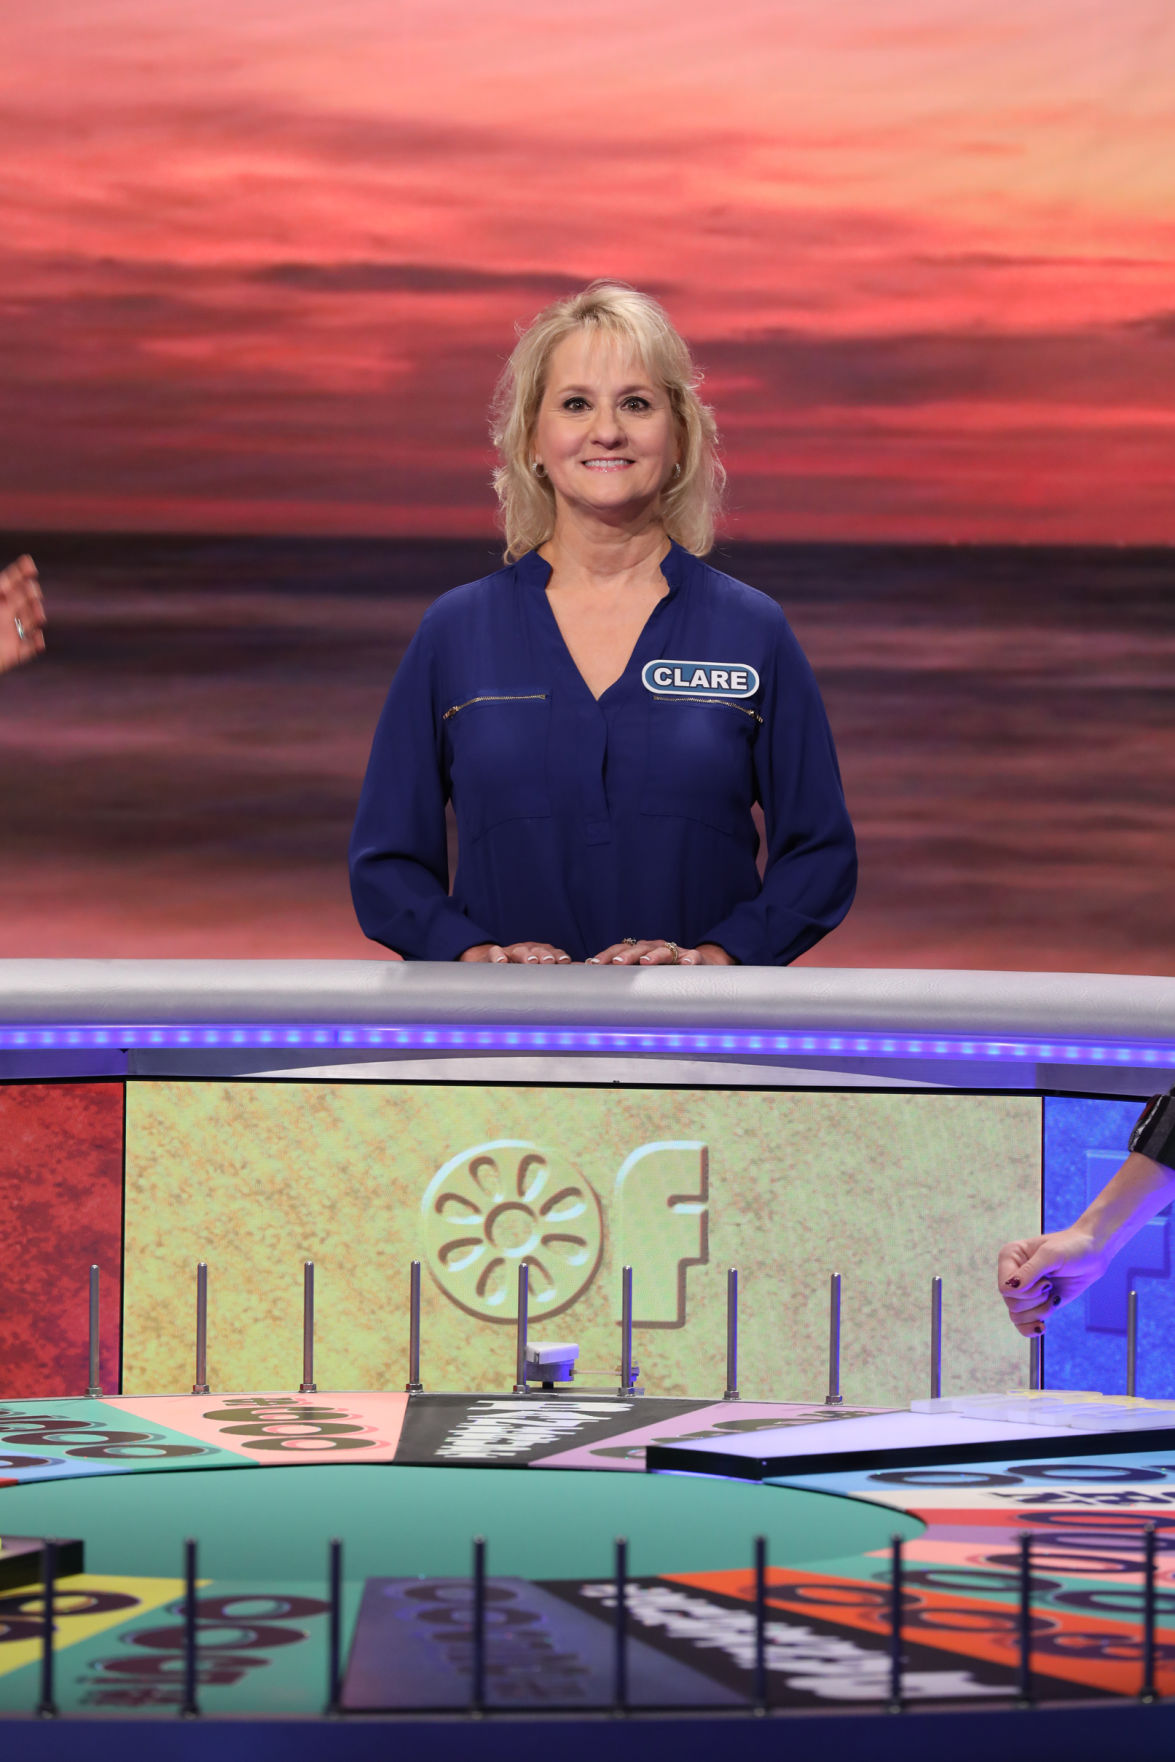 College Station Aggie lands 'Wheel of Fortune' spot | Local News | theeagle.com1175 x 1762